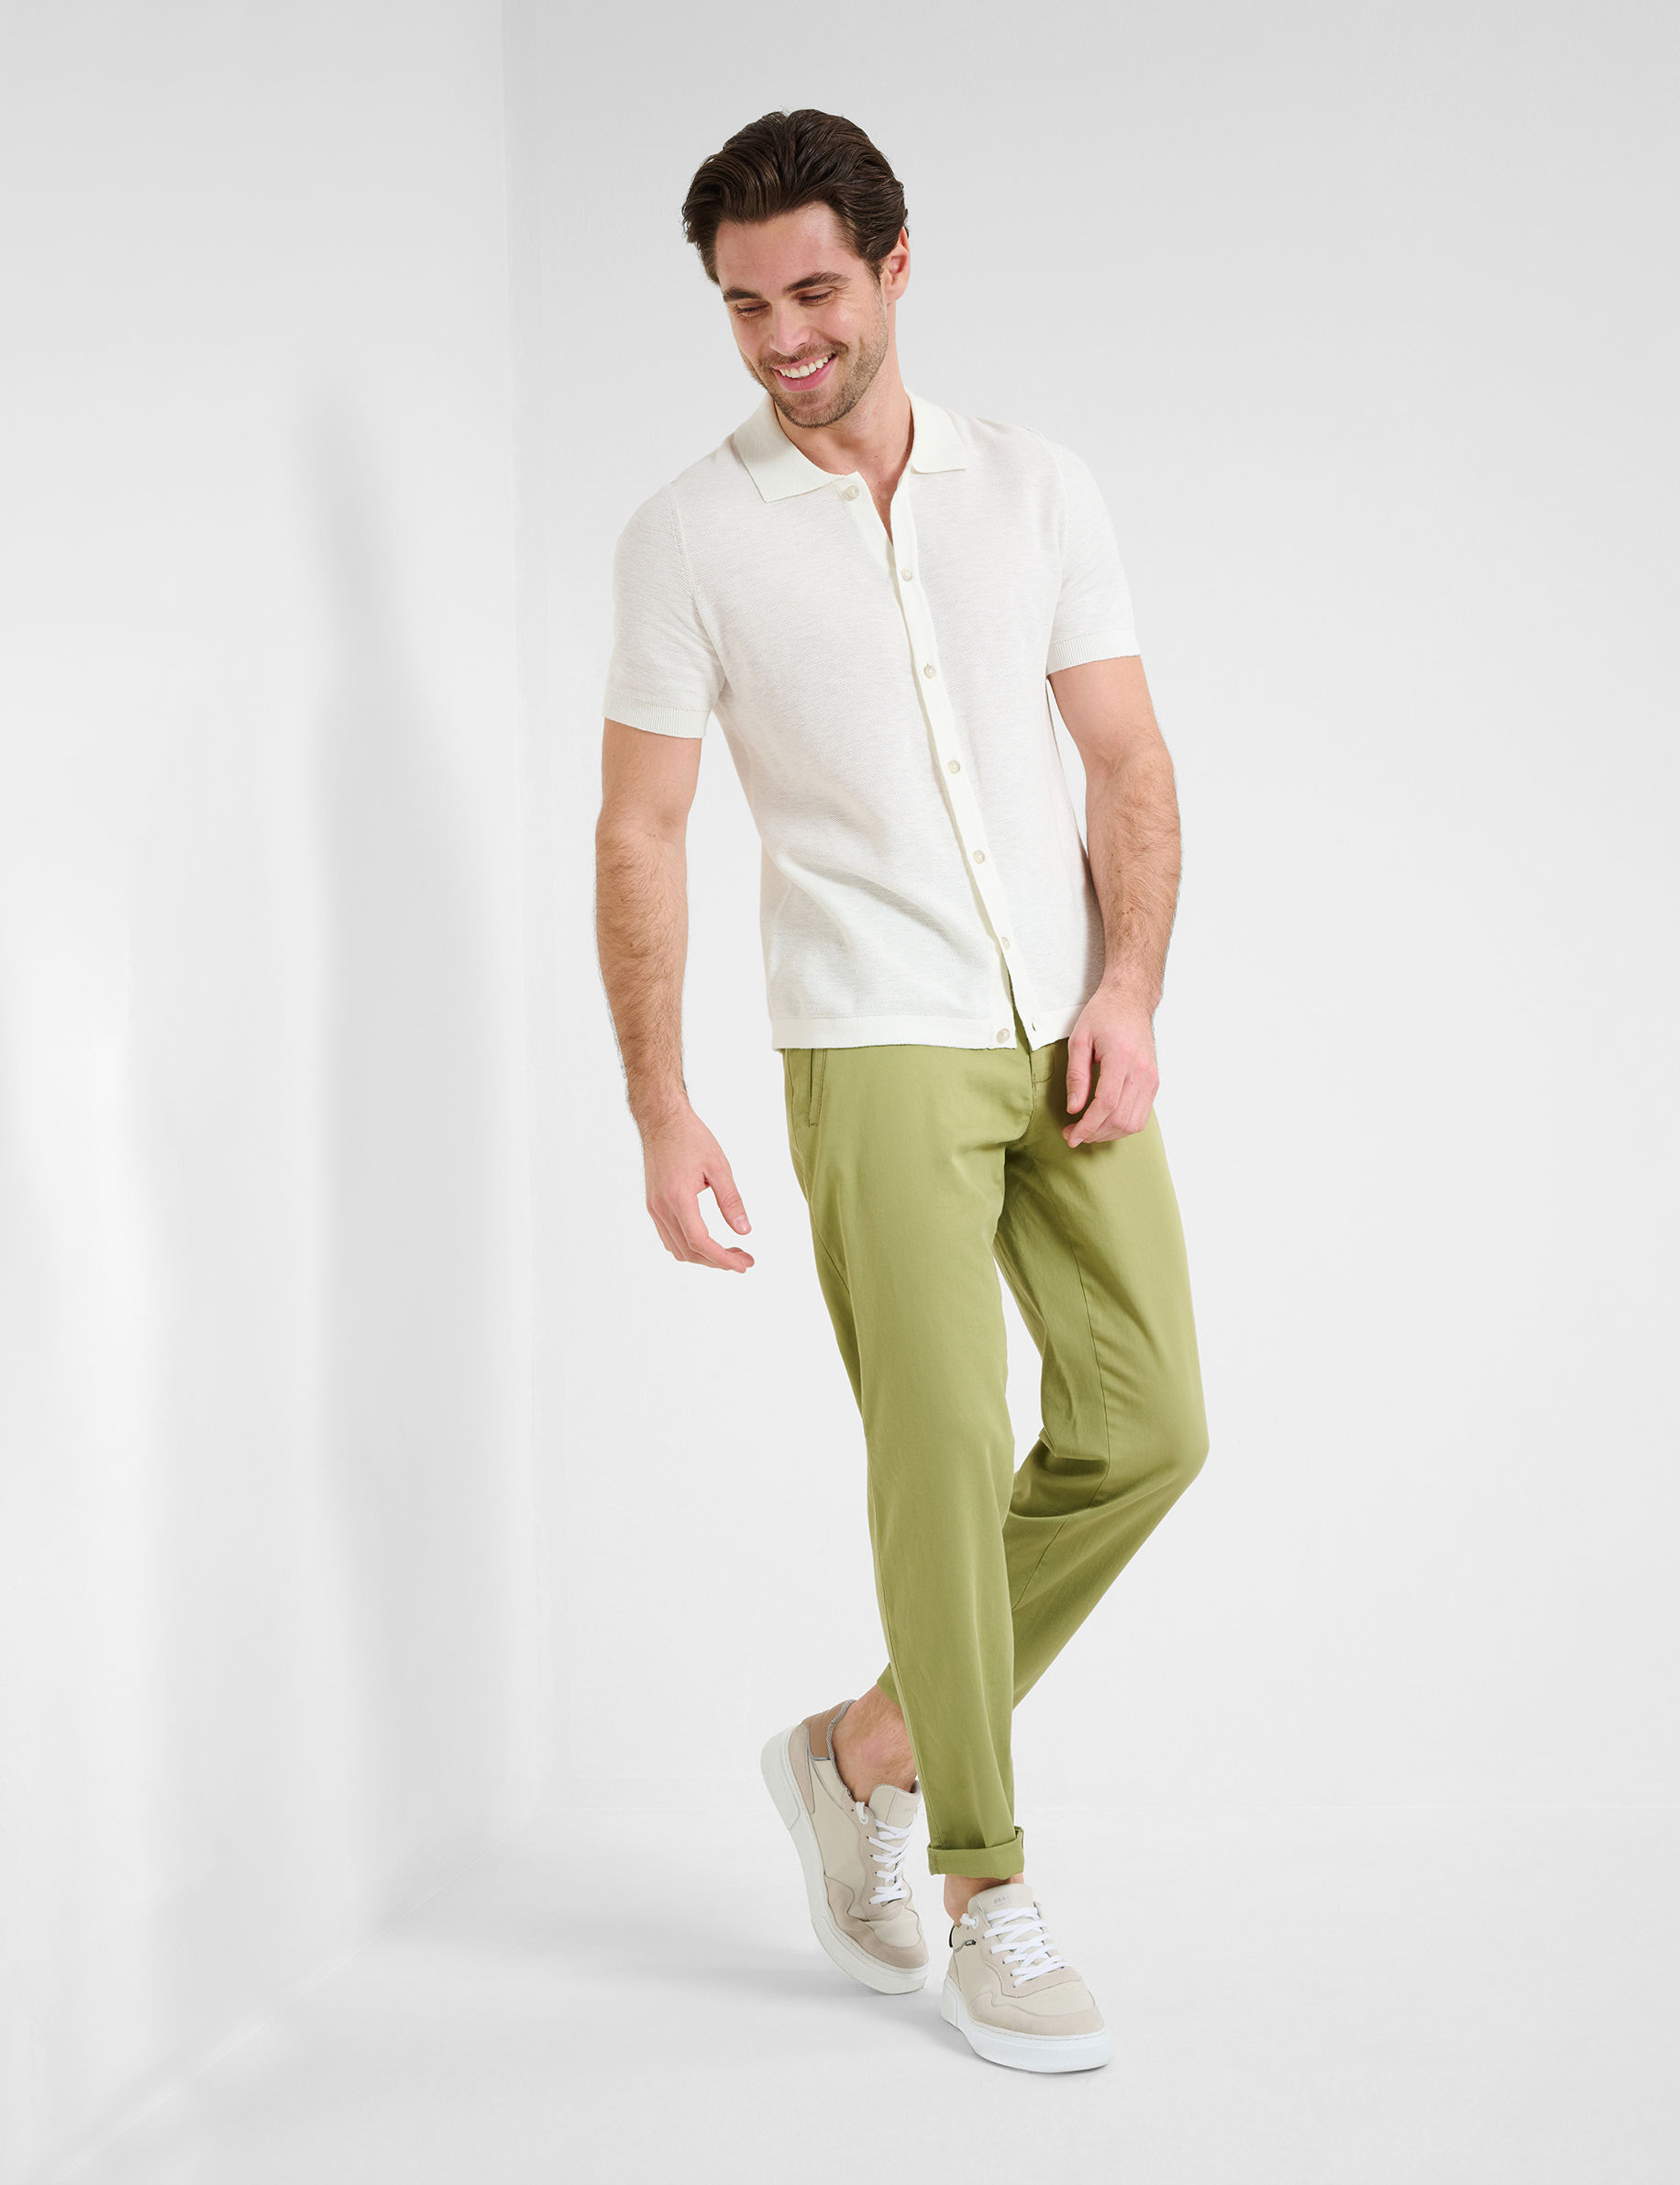 Men Style PHIL MANZANILLA Modern Fit Model Outfit